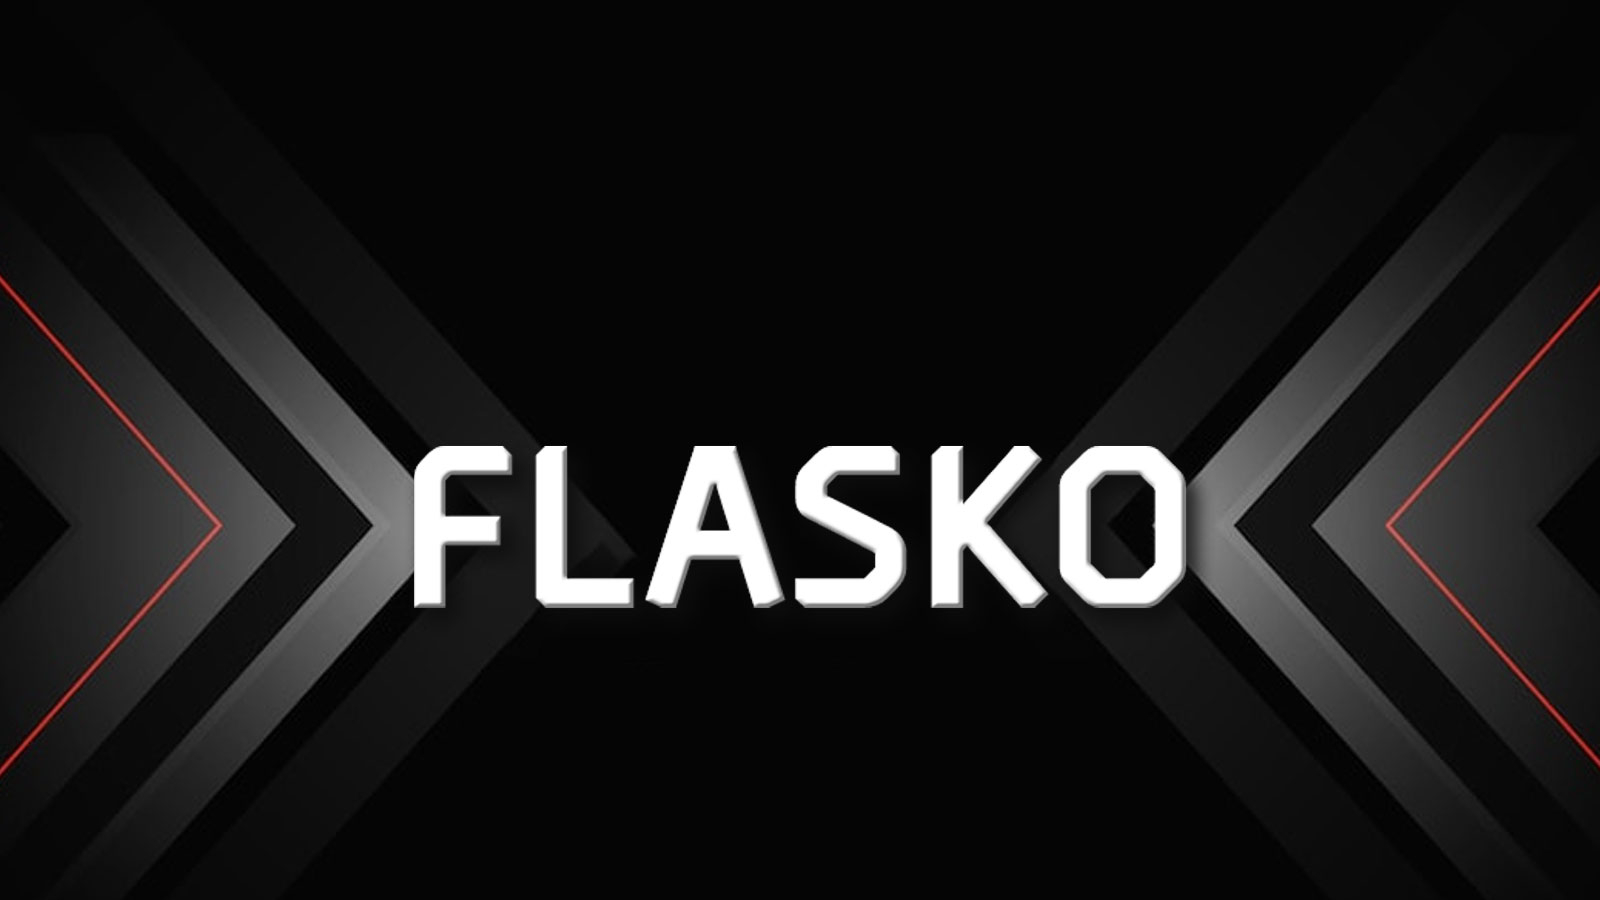 Flasko (FLSK) Token Sale Attempts to Attract the Attention of Solana (SOL), Dogecoin (DOGE) Enthusiasts